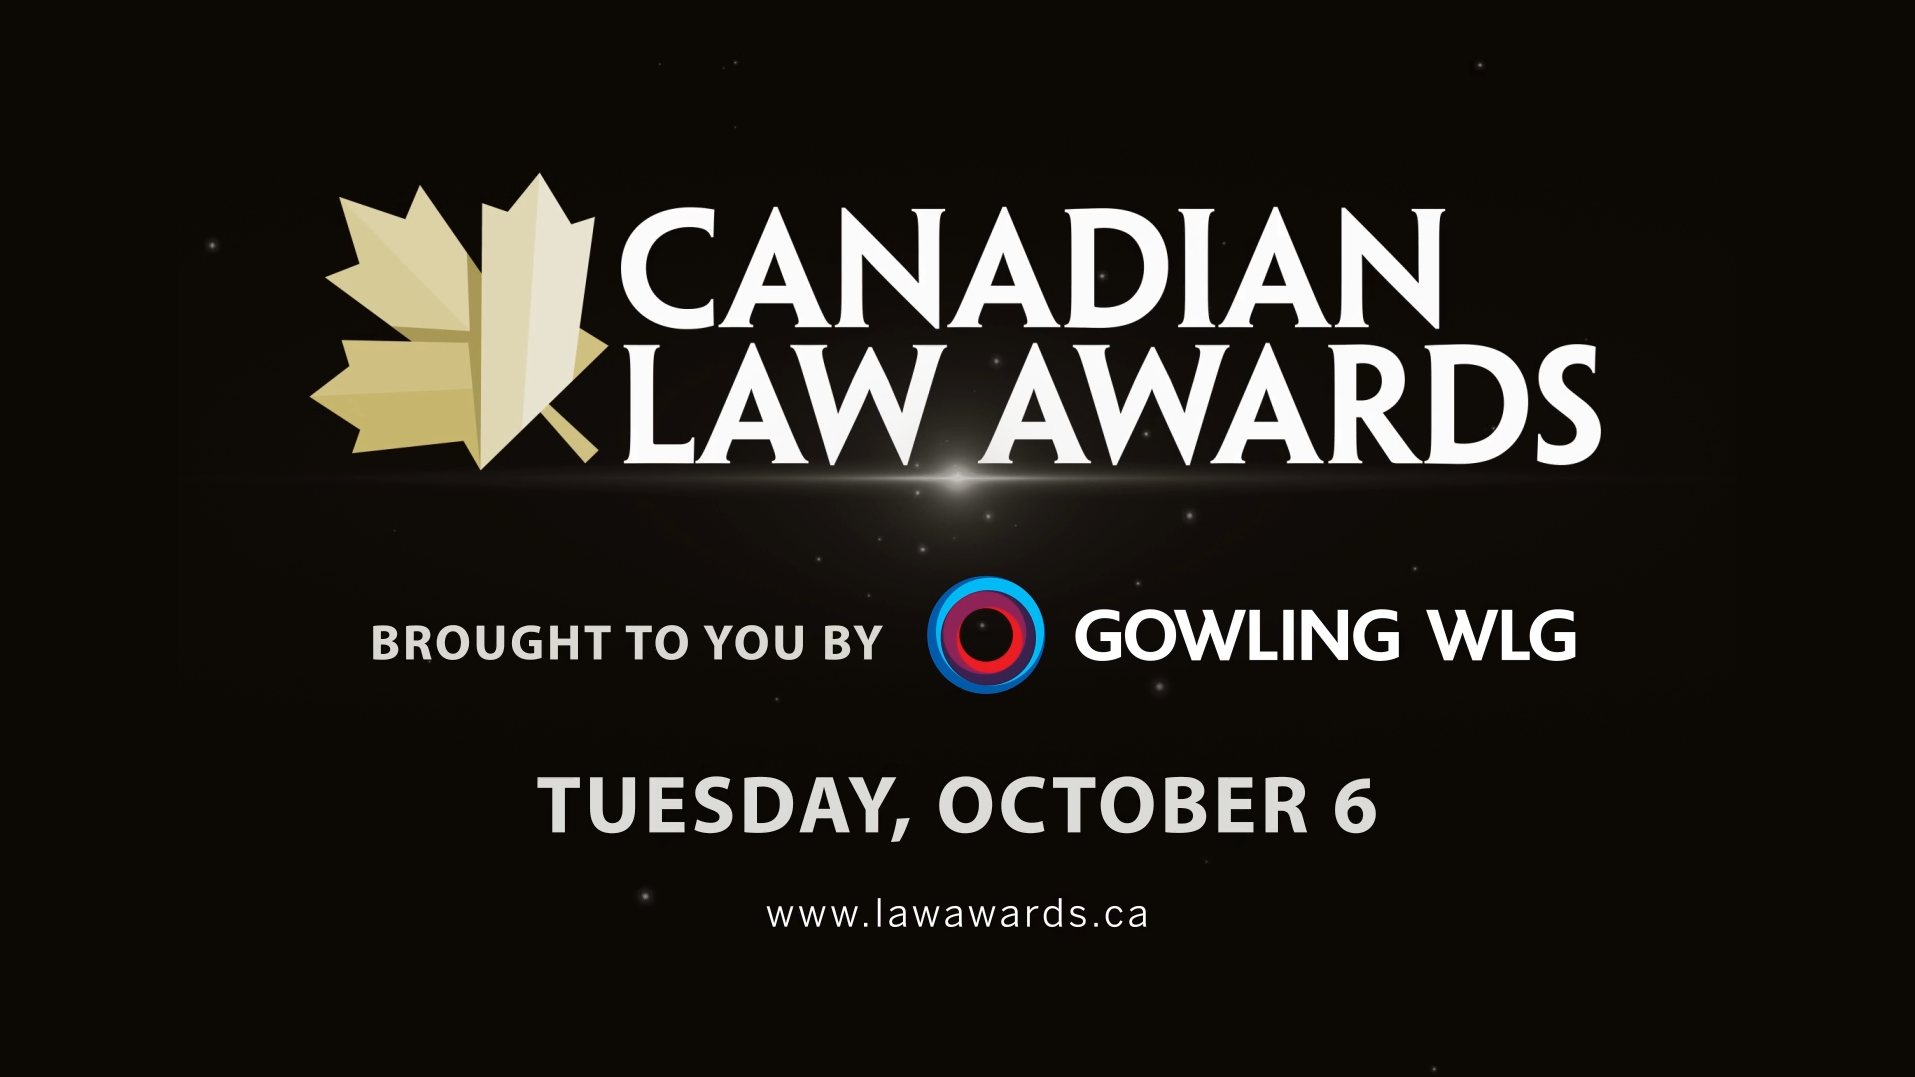 Introducing the virtual Canadian Law Awards